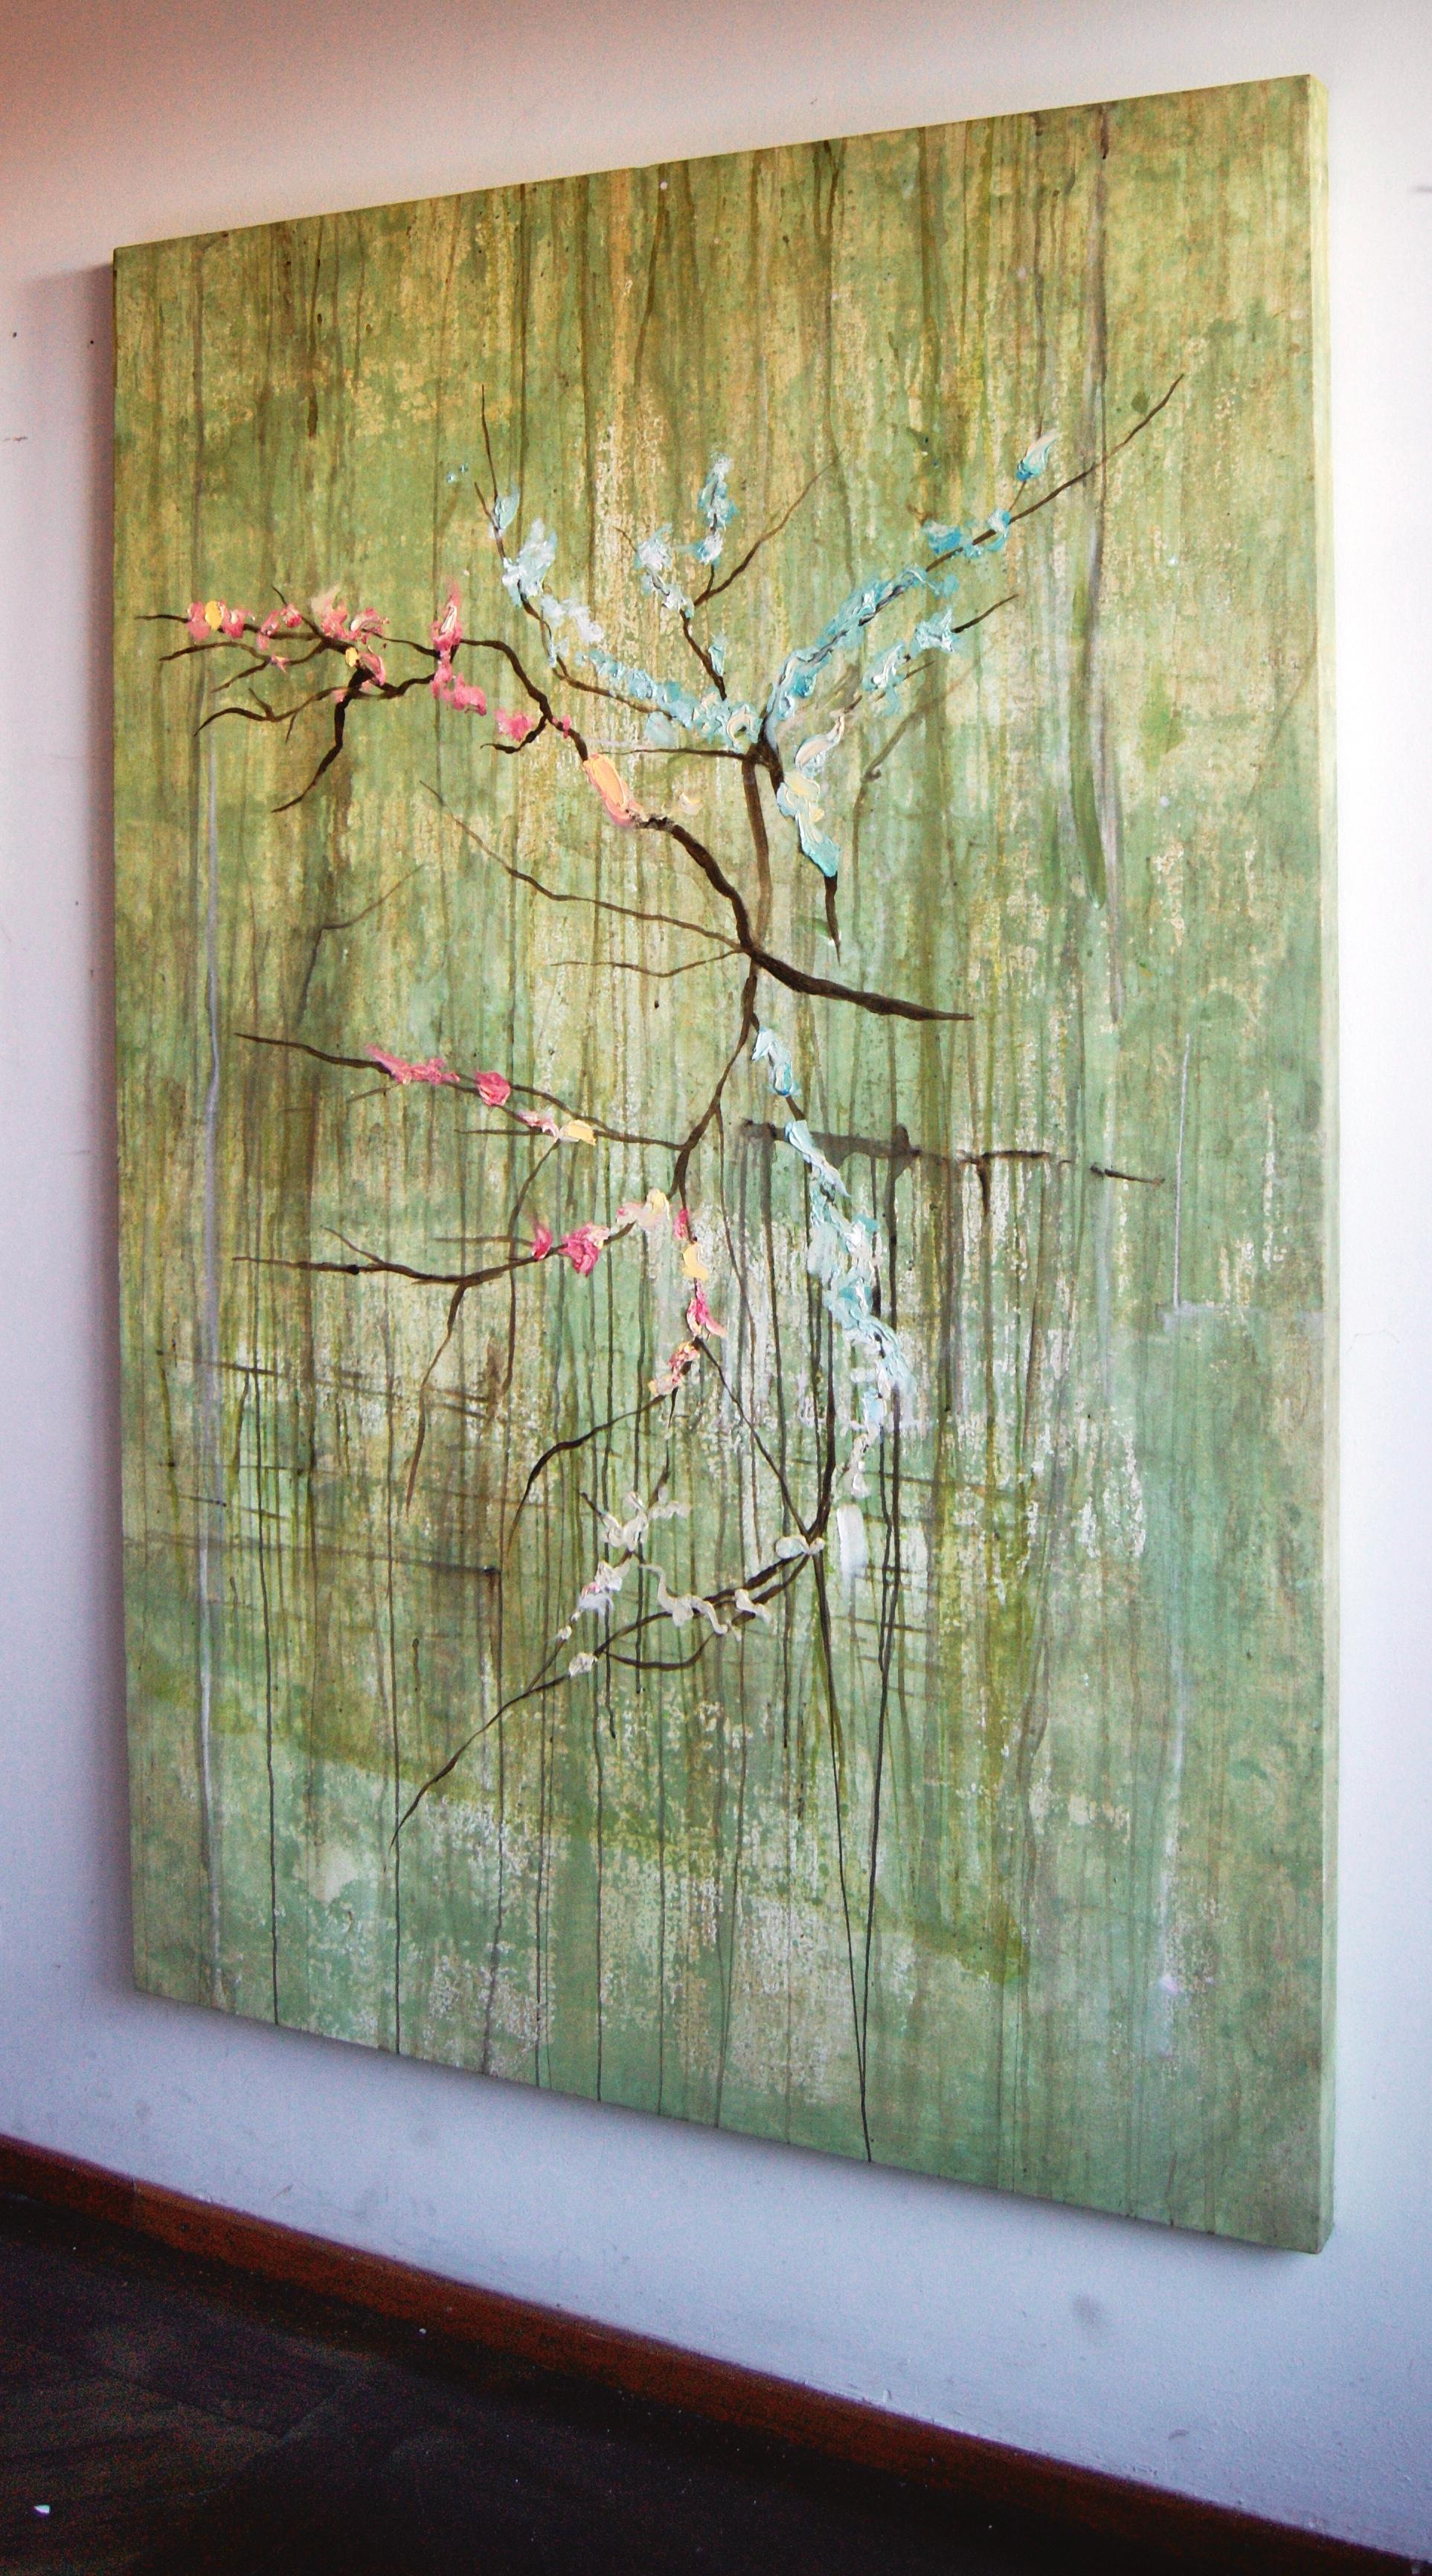 “Almendro en Flor”, Canvas - Brown Abstract Painting by Guillermo Conte